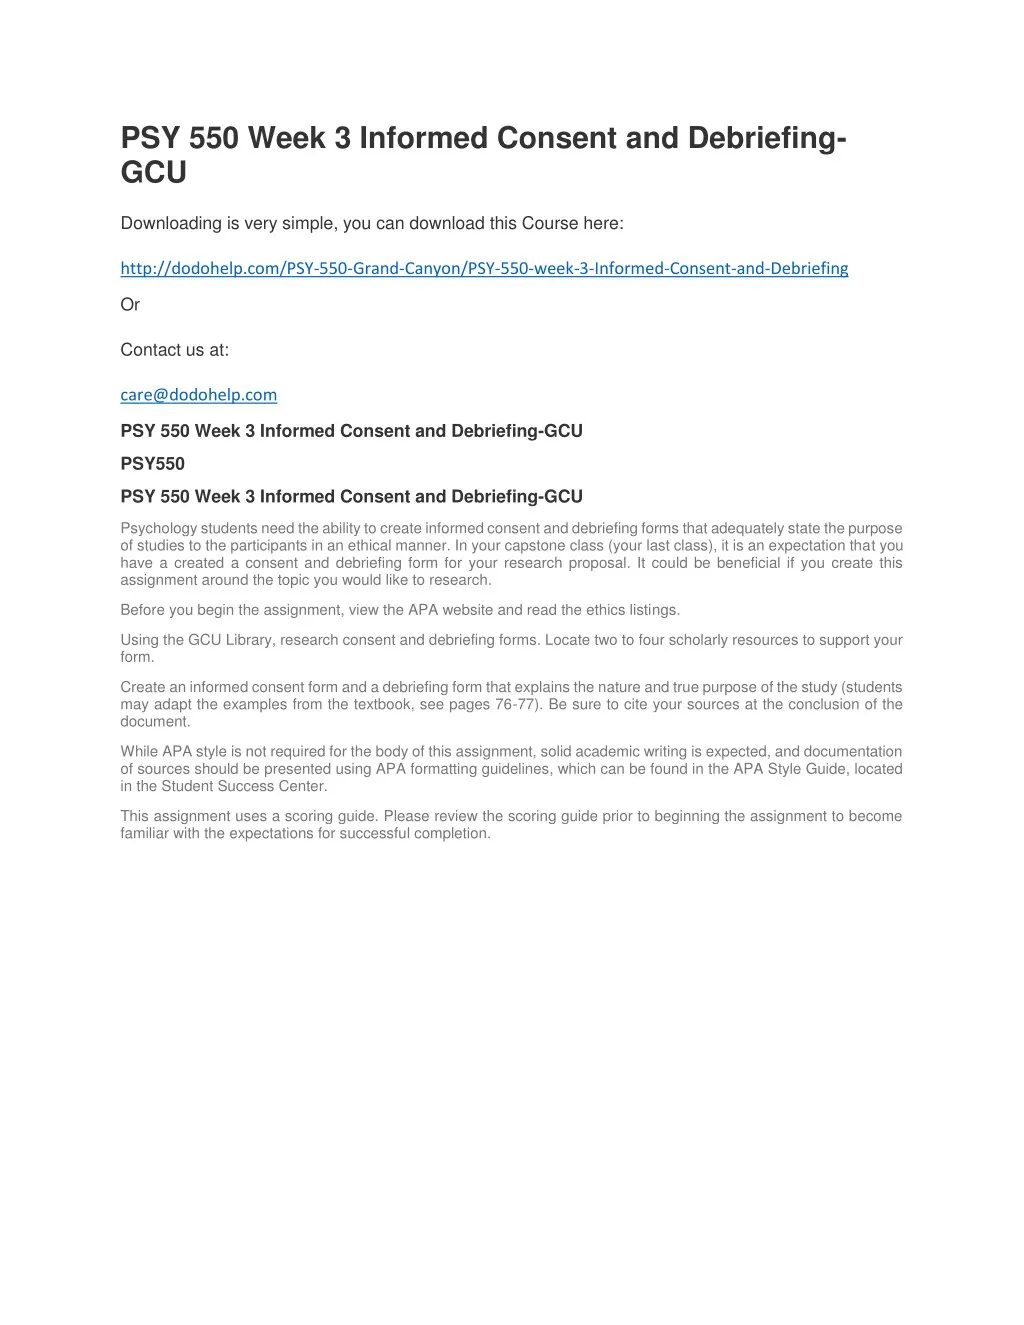 psy 550 week 3 informed consent and debriefing gcu